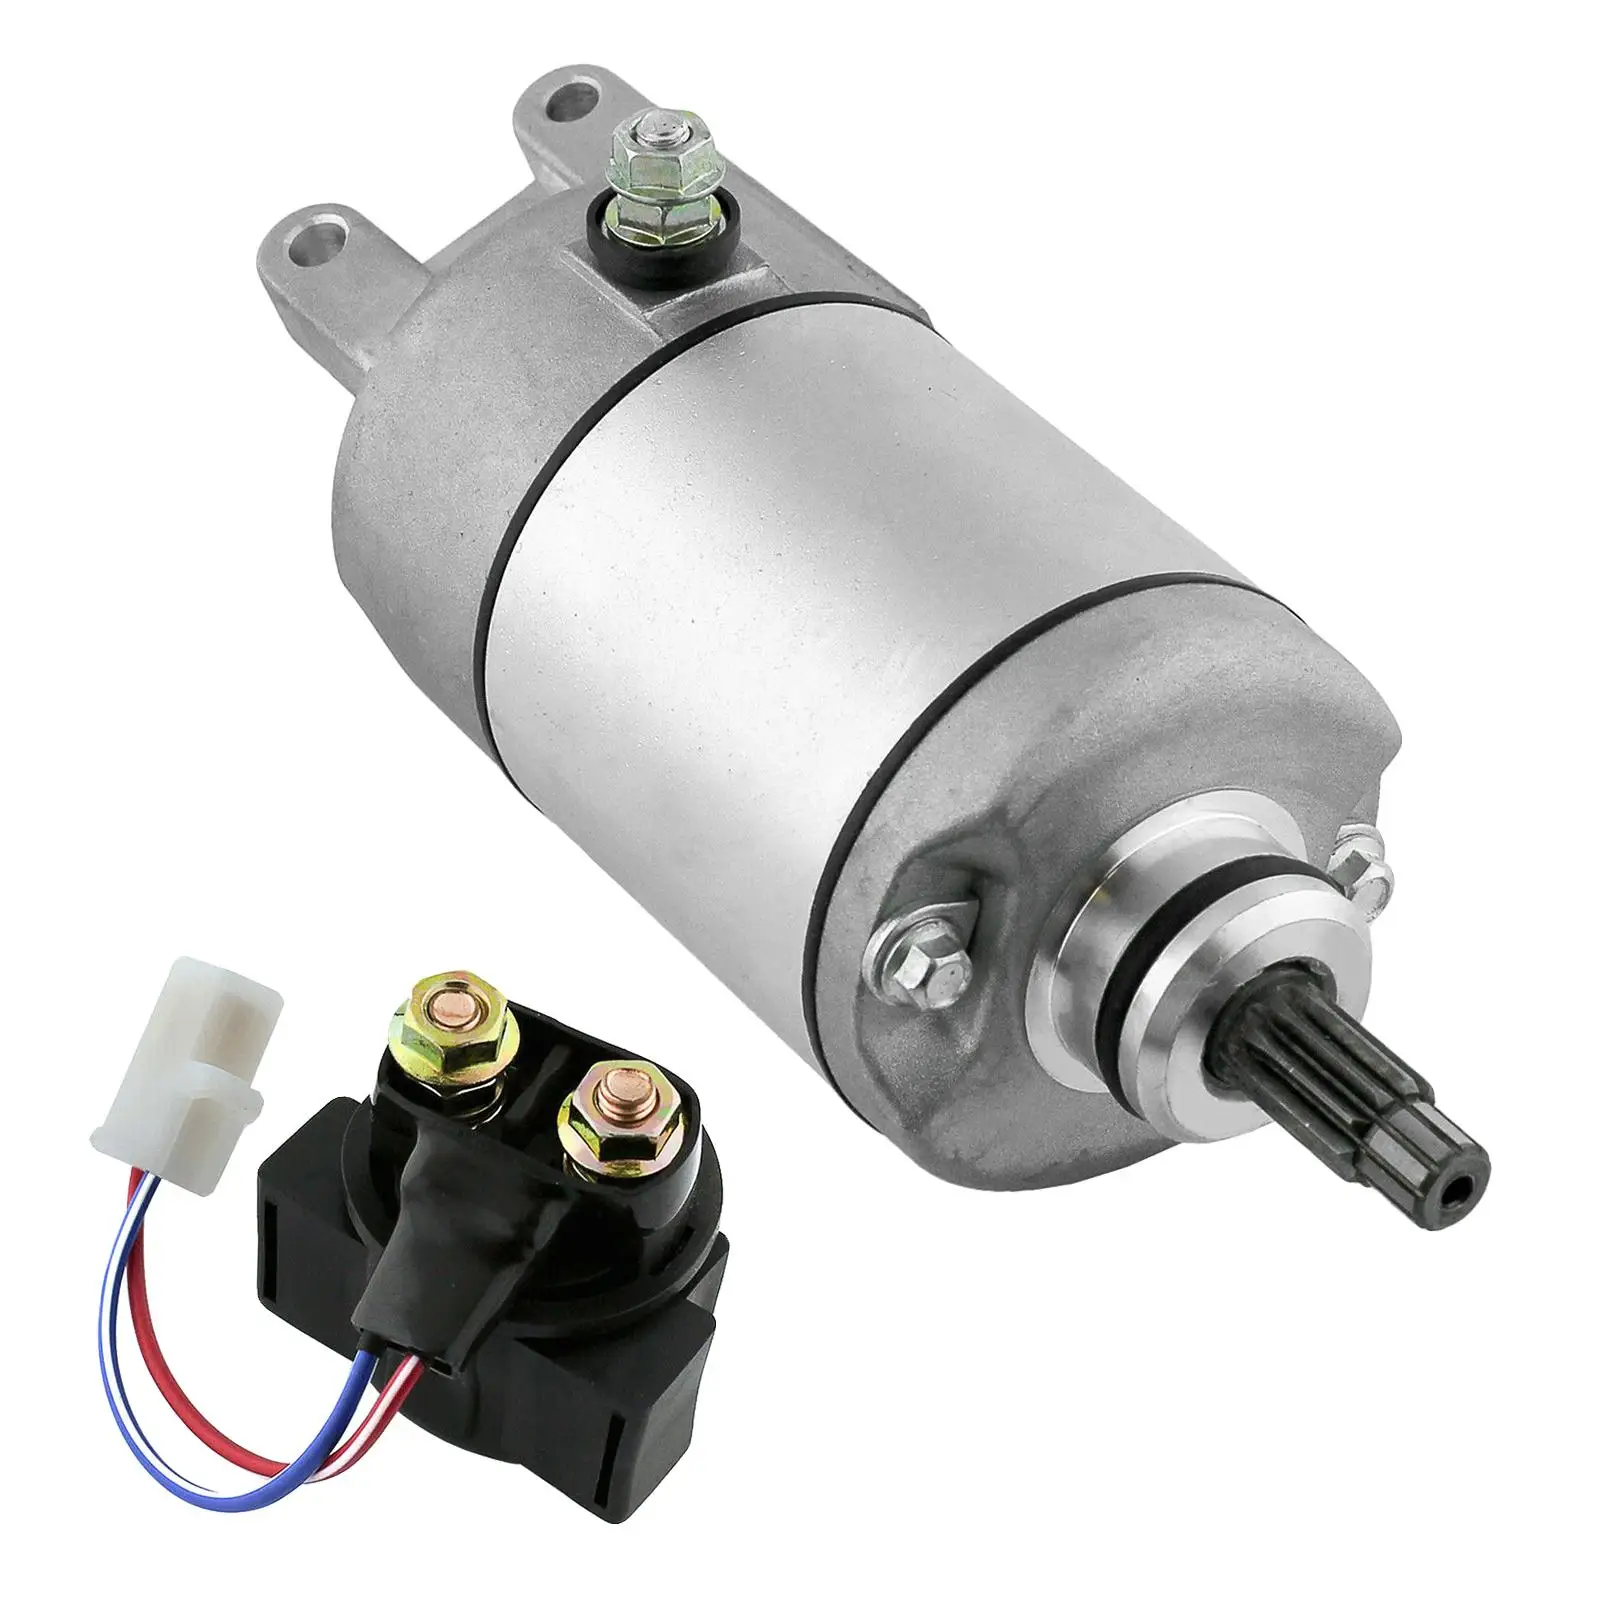 

Starter Ccw SM778018337AD Accessories with Relay Solenoid Fits for TRx300FW 4x4 Honda Fourtrax 300 1988-2000 TRx300 2x4